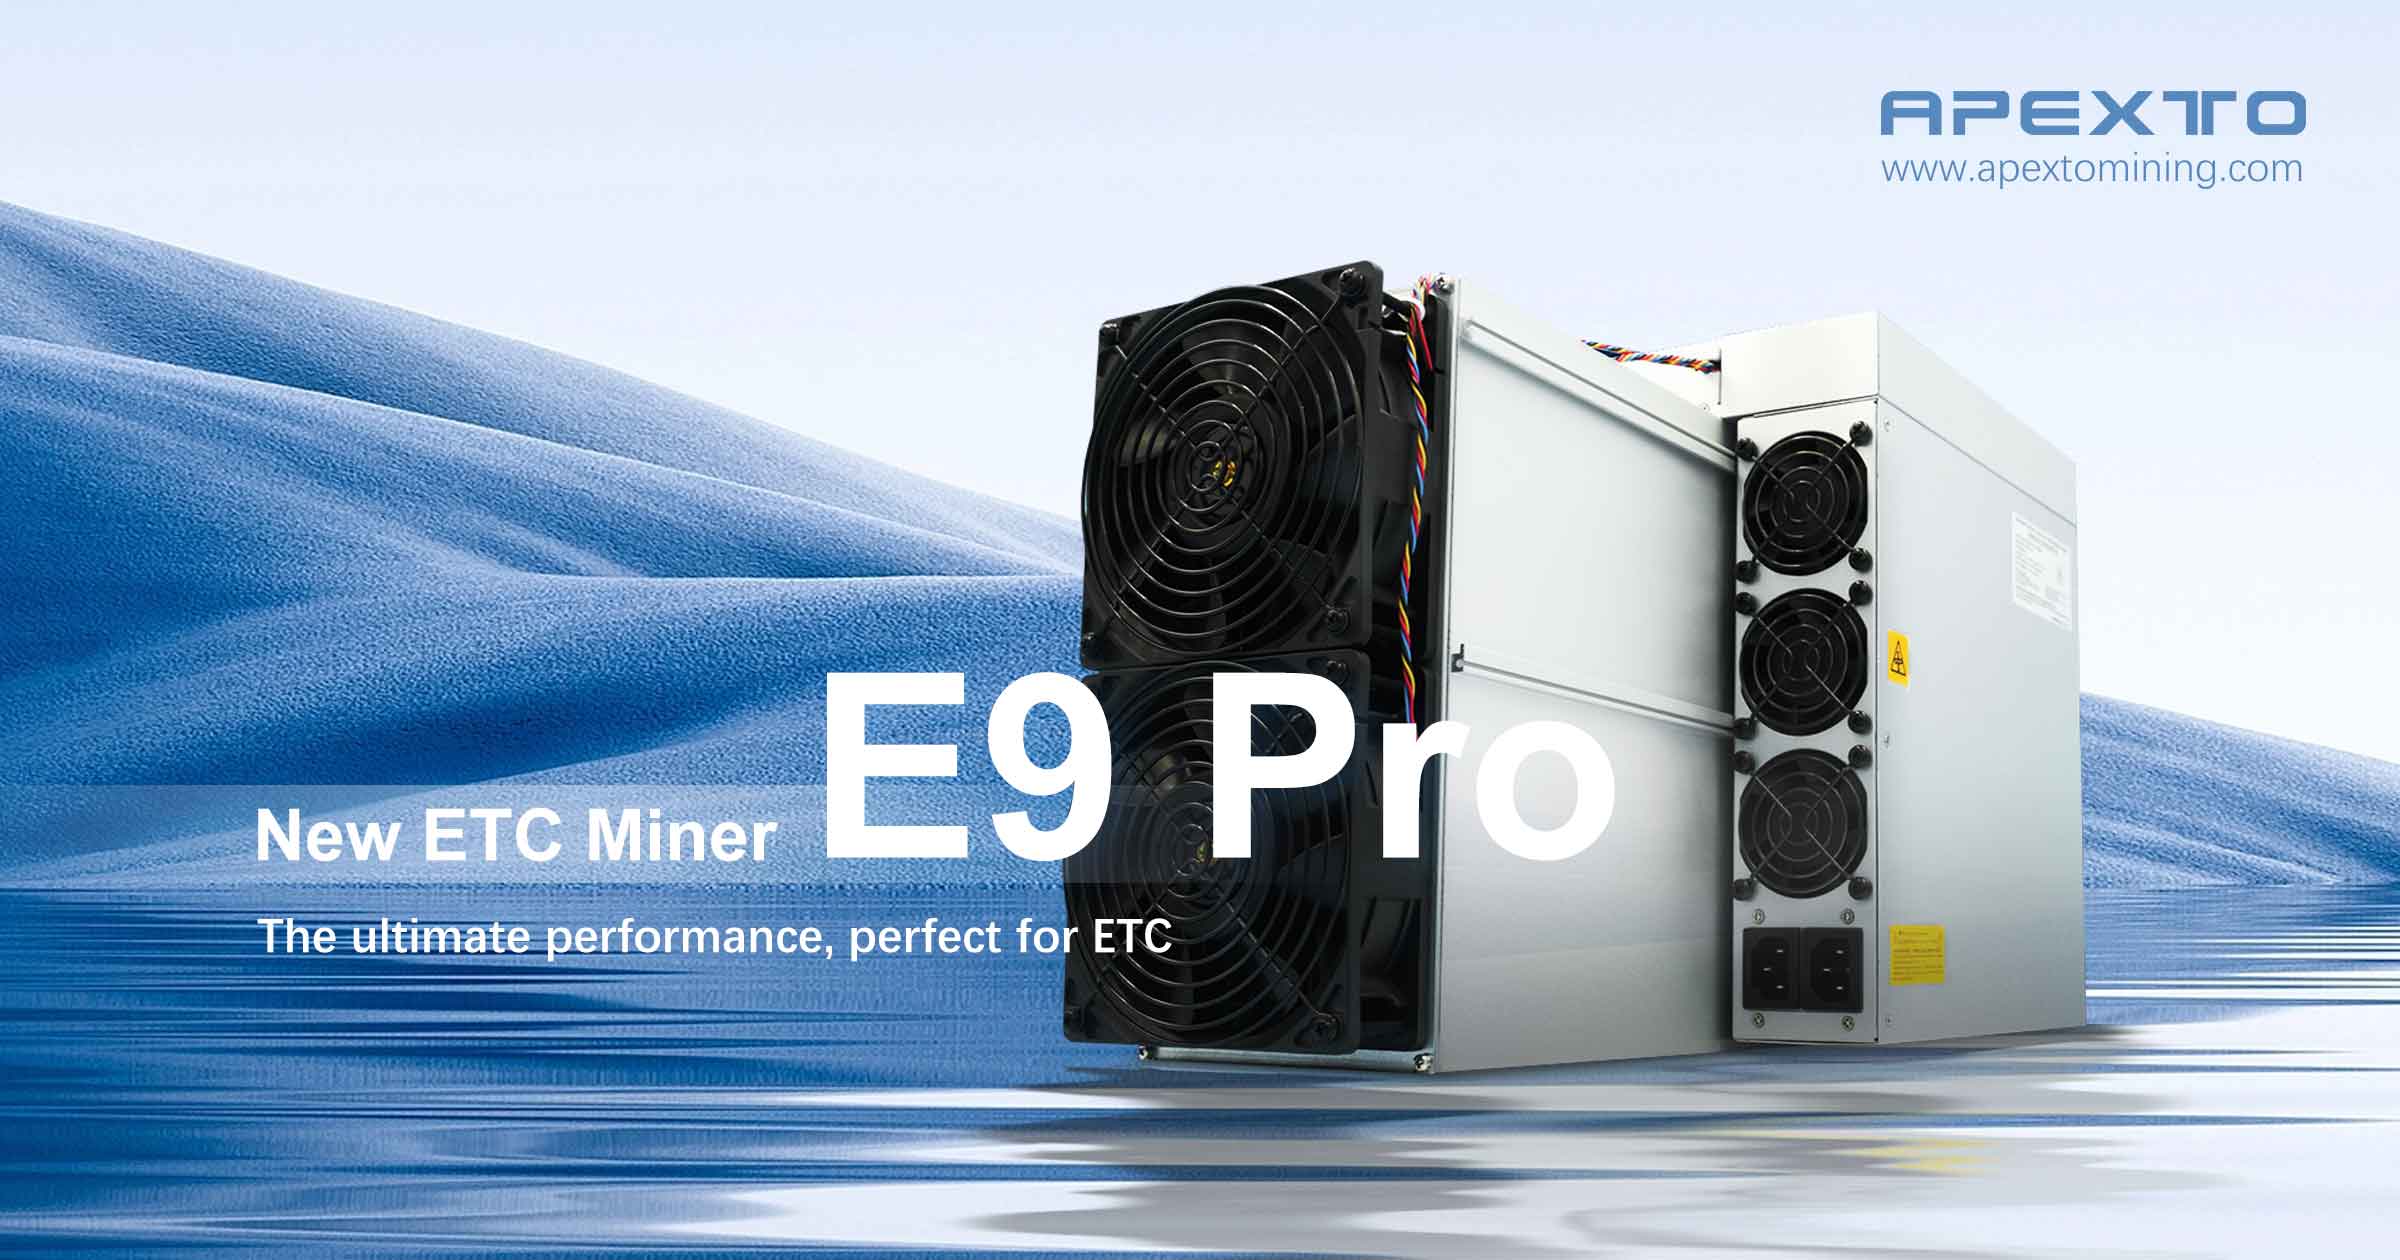 Bitmain Just Released The Most Profitable Ethereum Classic Miner! The Antminer E9 Pro ETC Miner